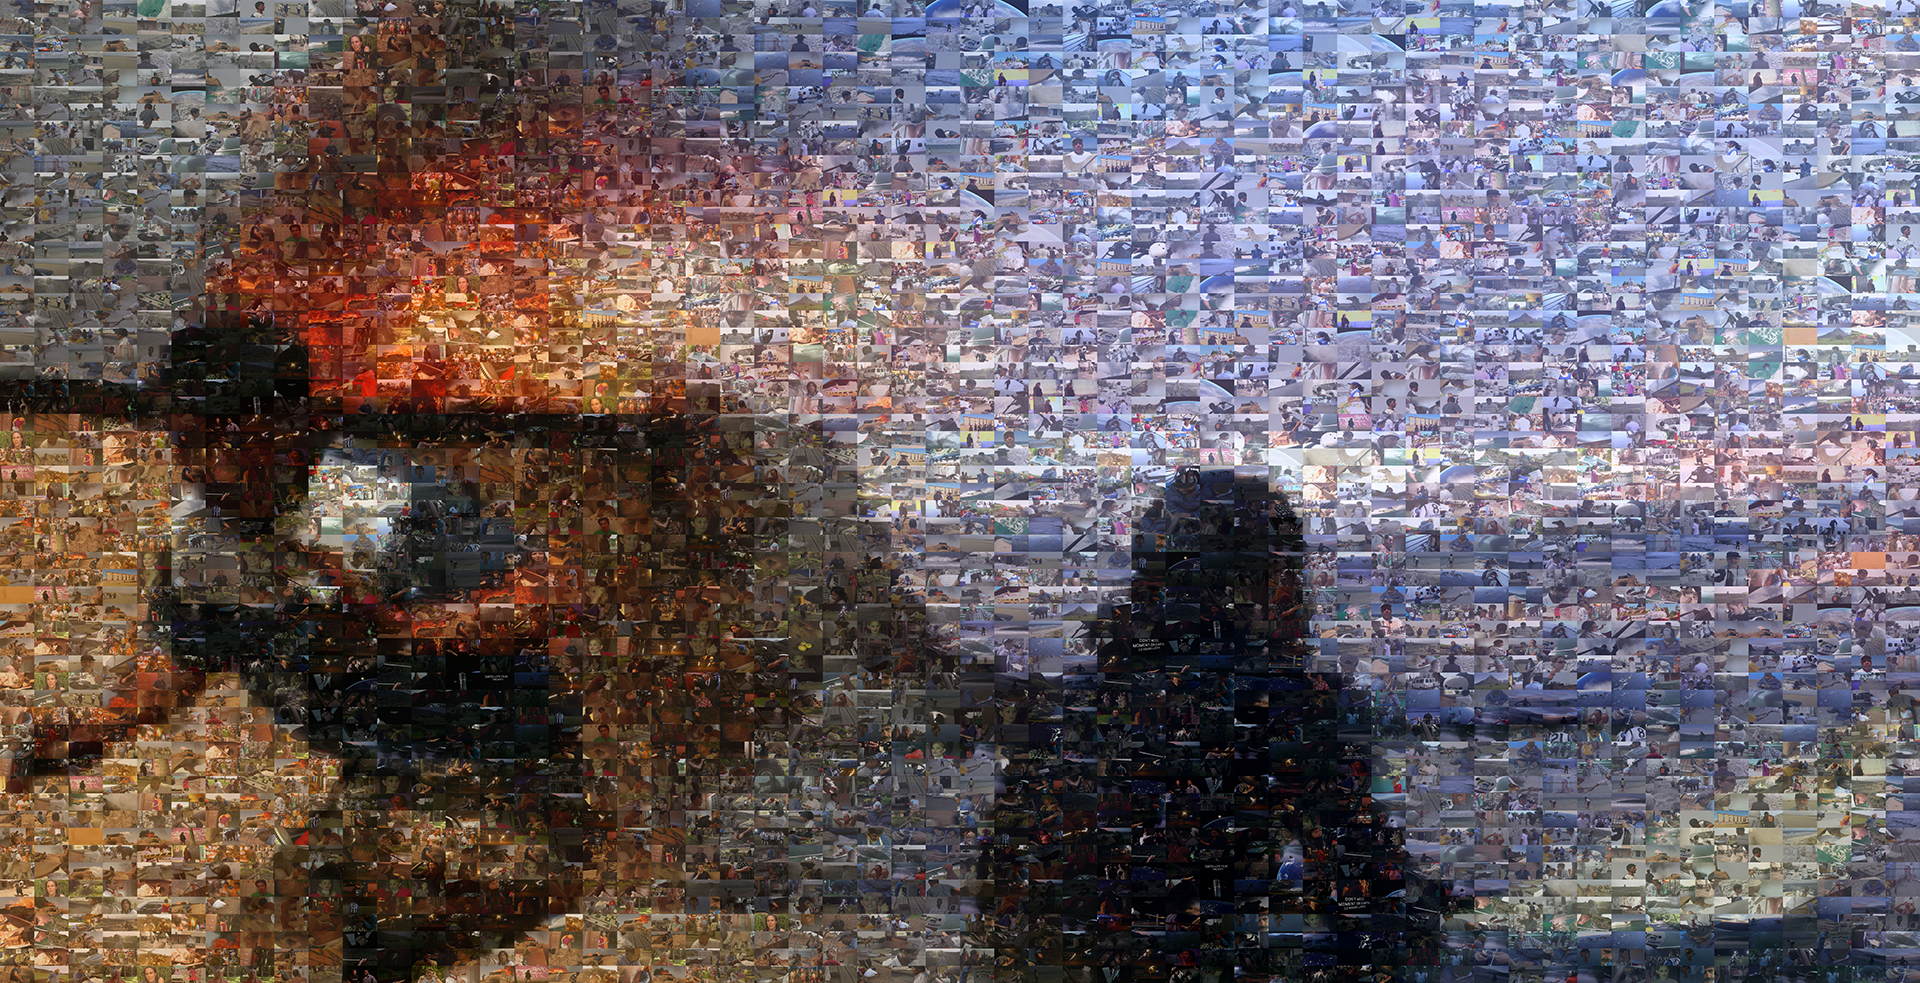 photo mosaic created using over 1000 various still images from the movie